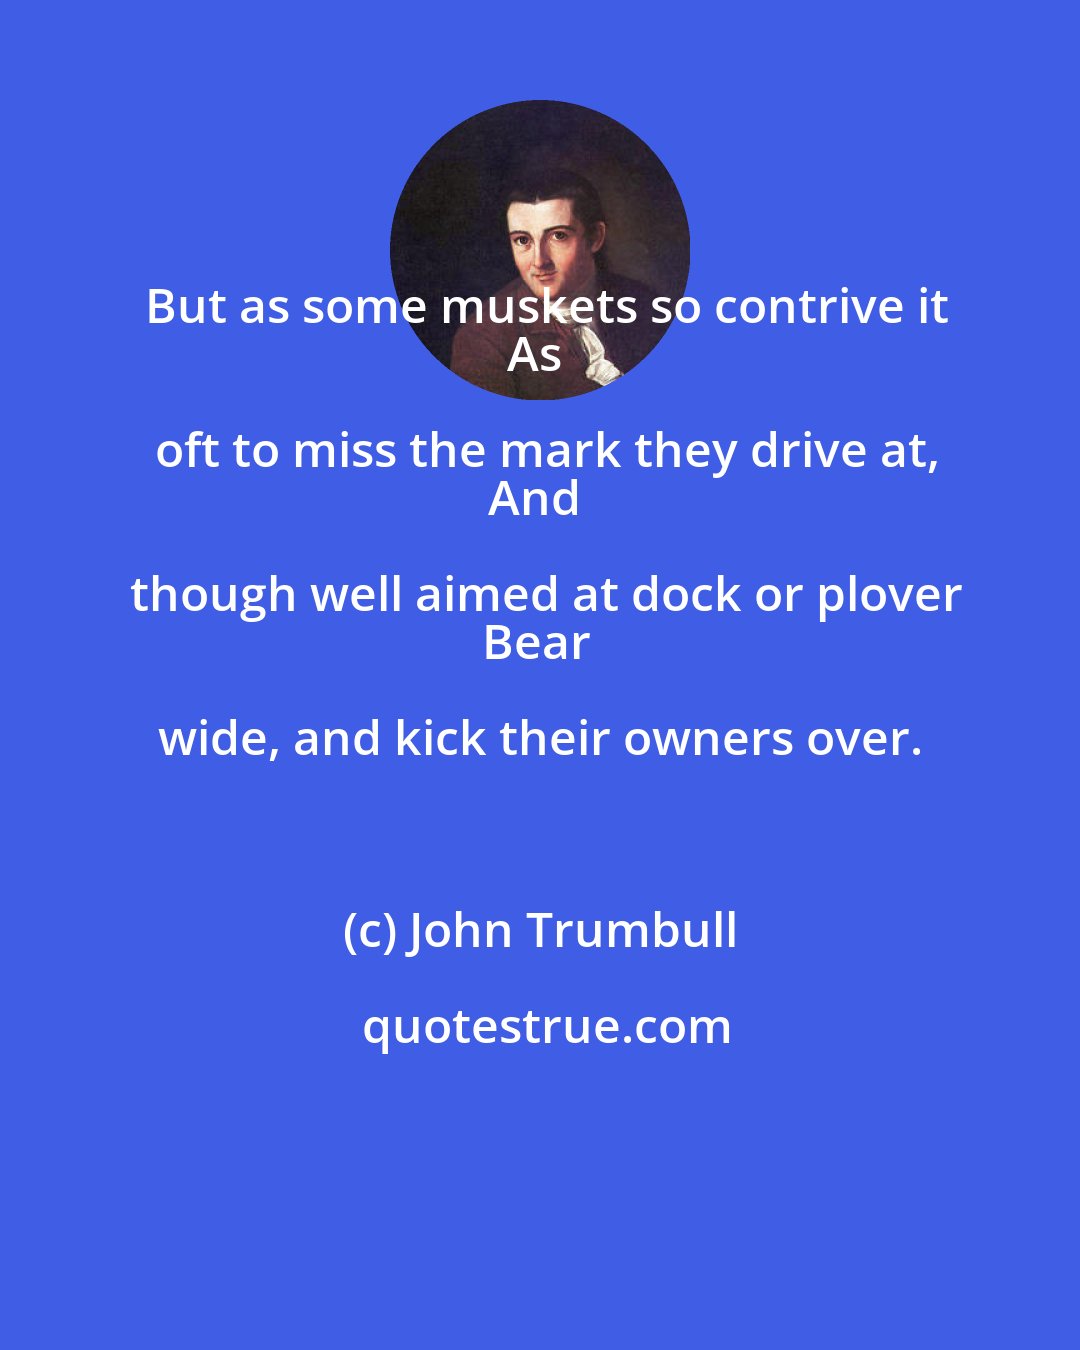 John Trumbull: But as some muskets so contrive it
As oft to miss the mark they drive at,
And though well aimed at dock or plover
Bear wide, and kick their owners over.